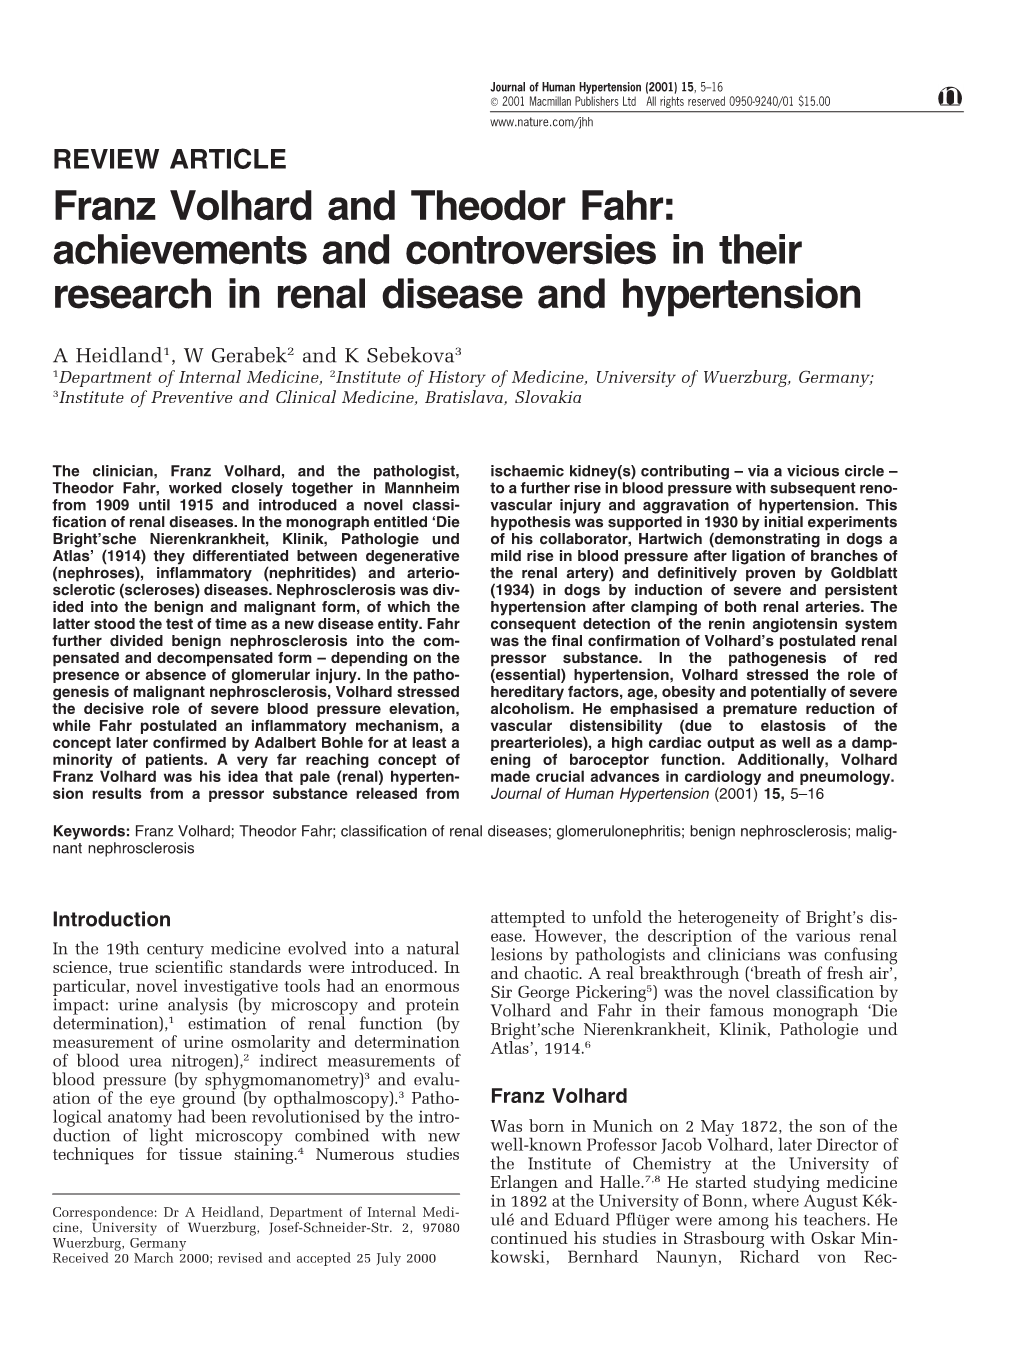 Franz Volhard and Theodor Fahr: Achievements and Controversies in Their Research in Renal Disease and Hypertension